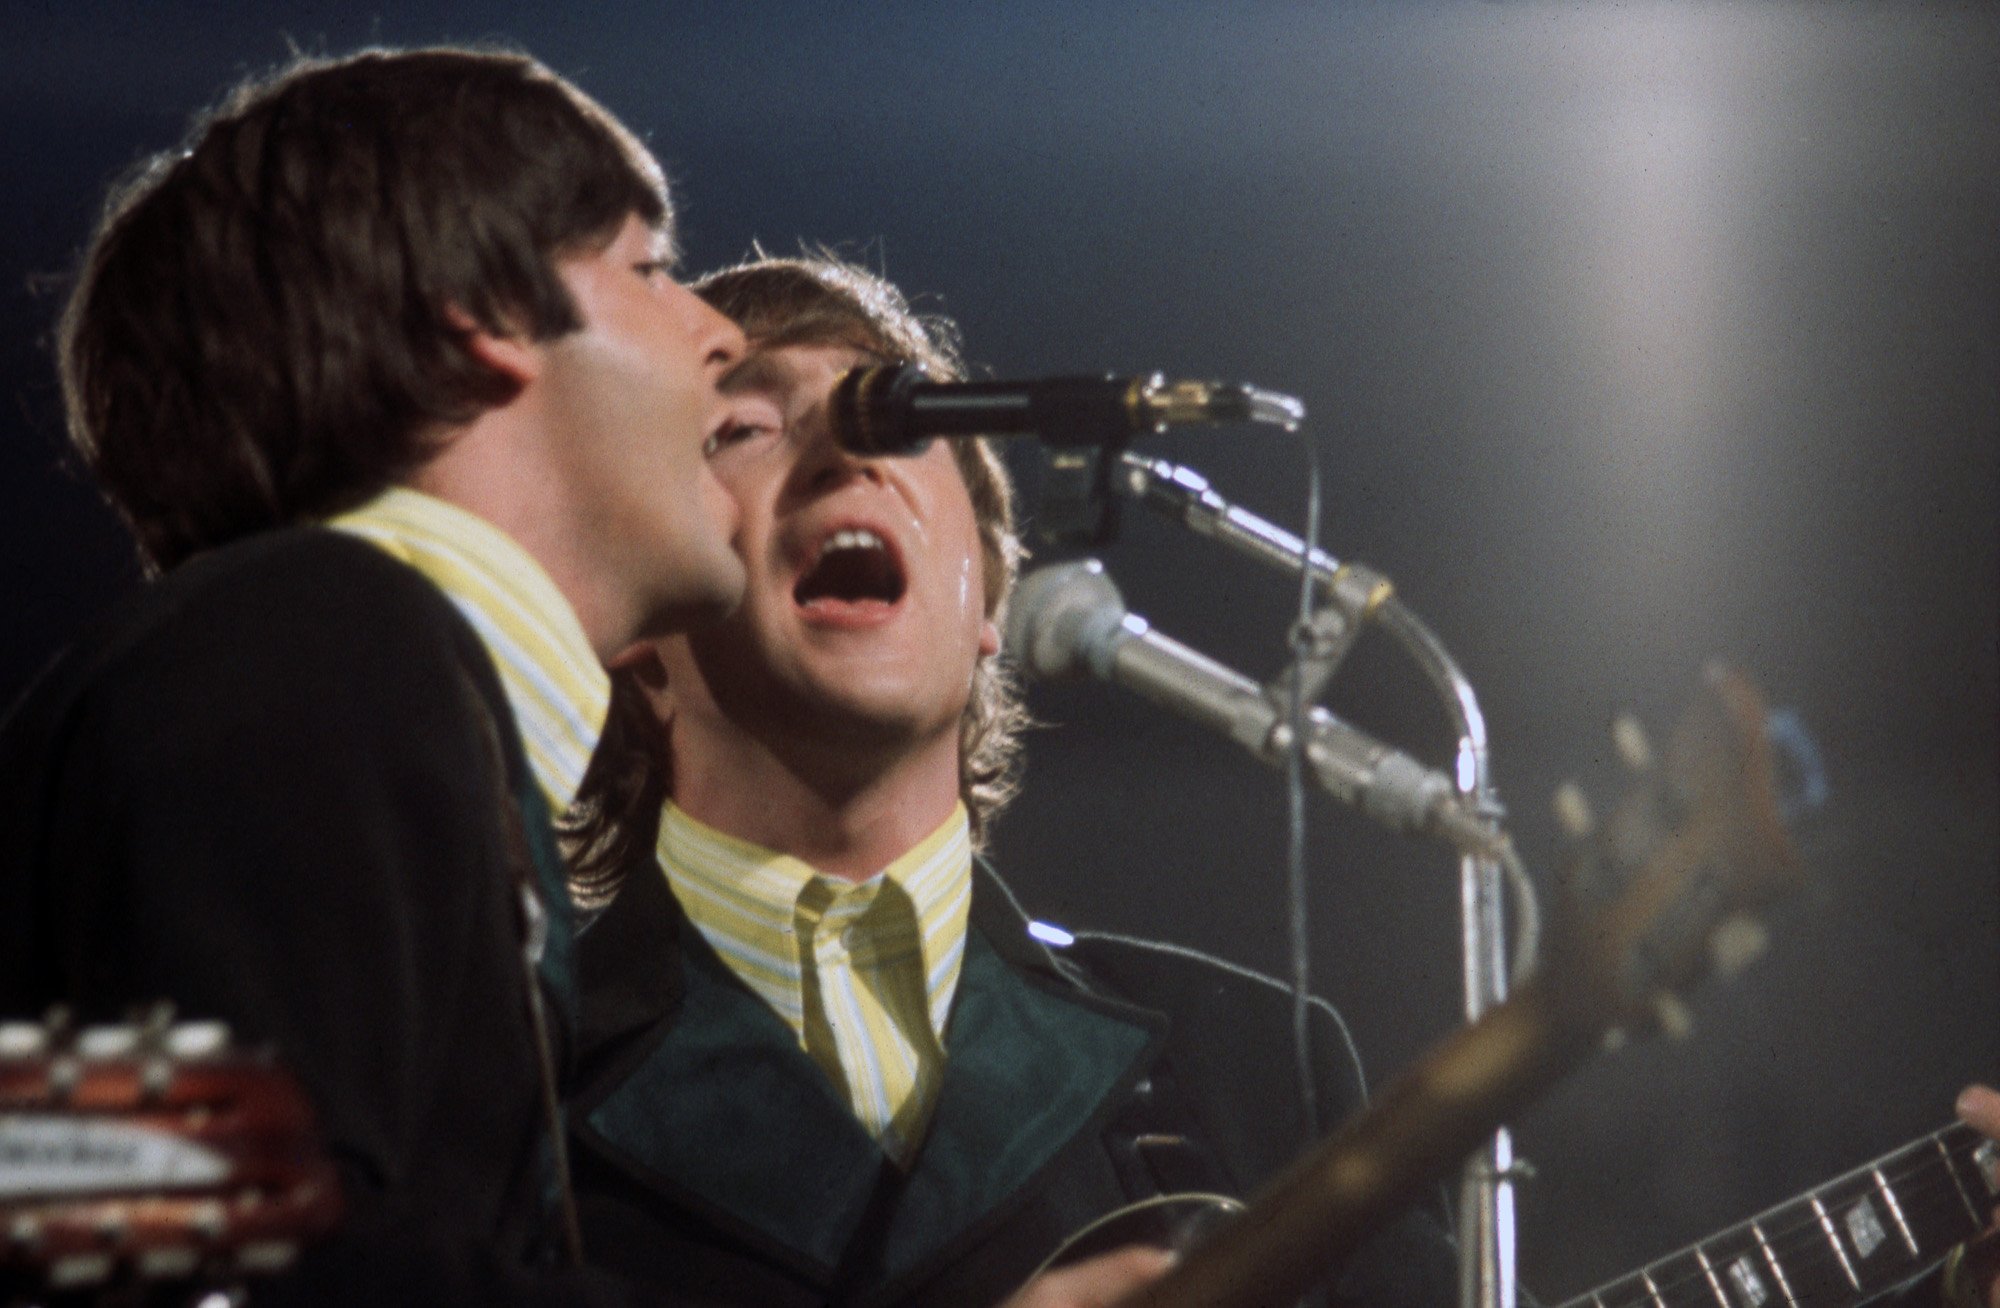 The Beatles: Paul McCartney and John Lennon sing together